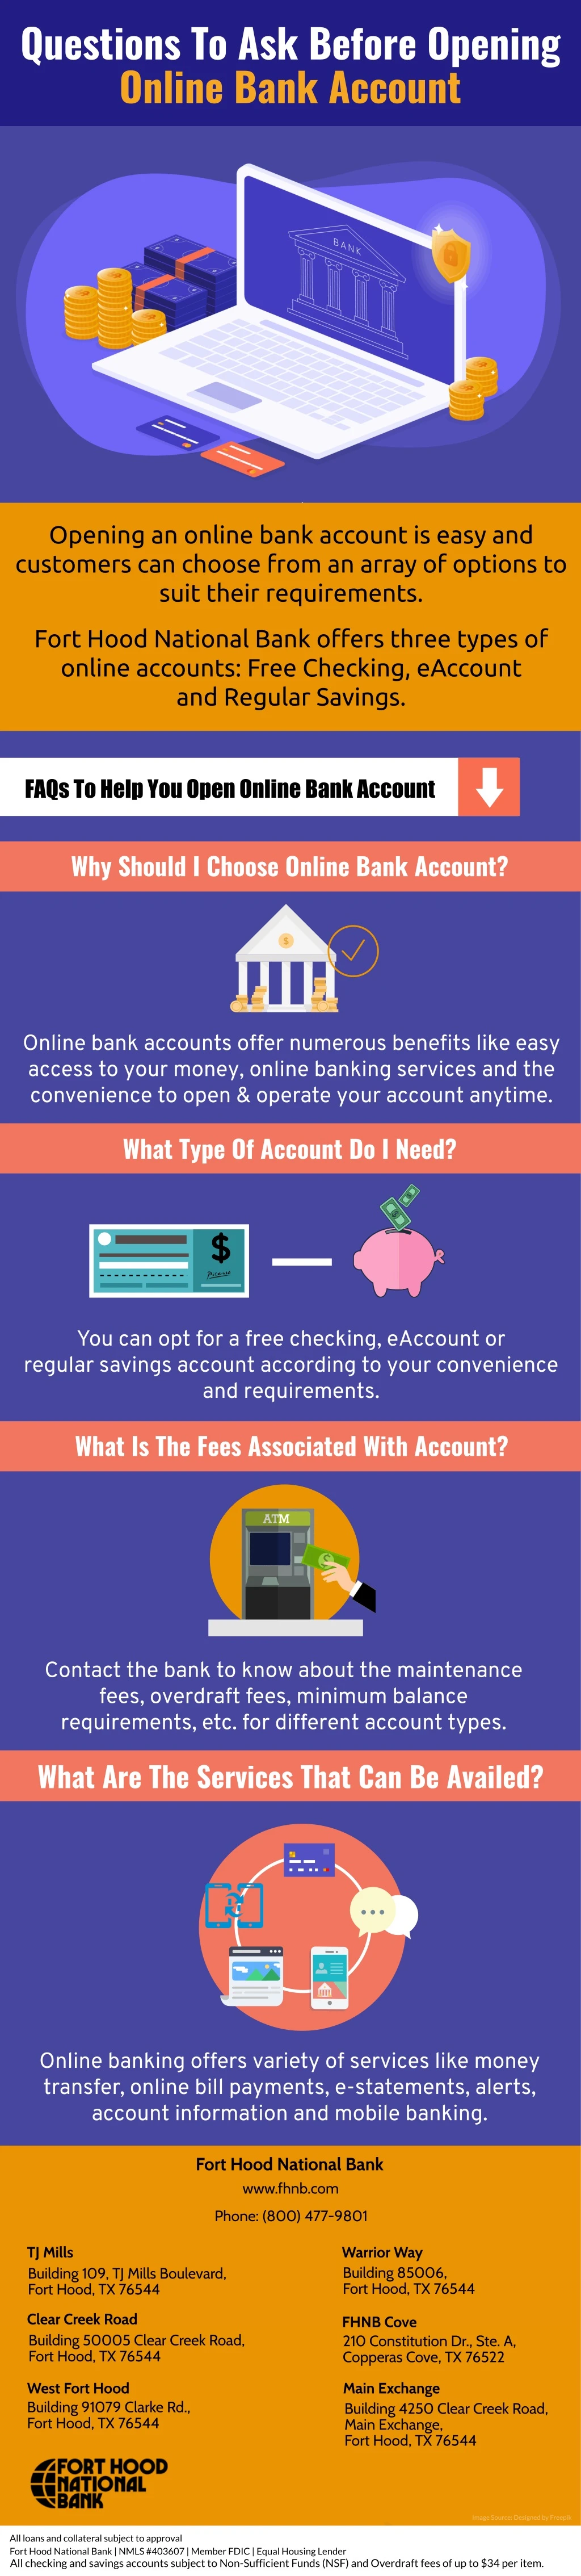 questions to ask before opening online bank